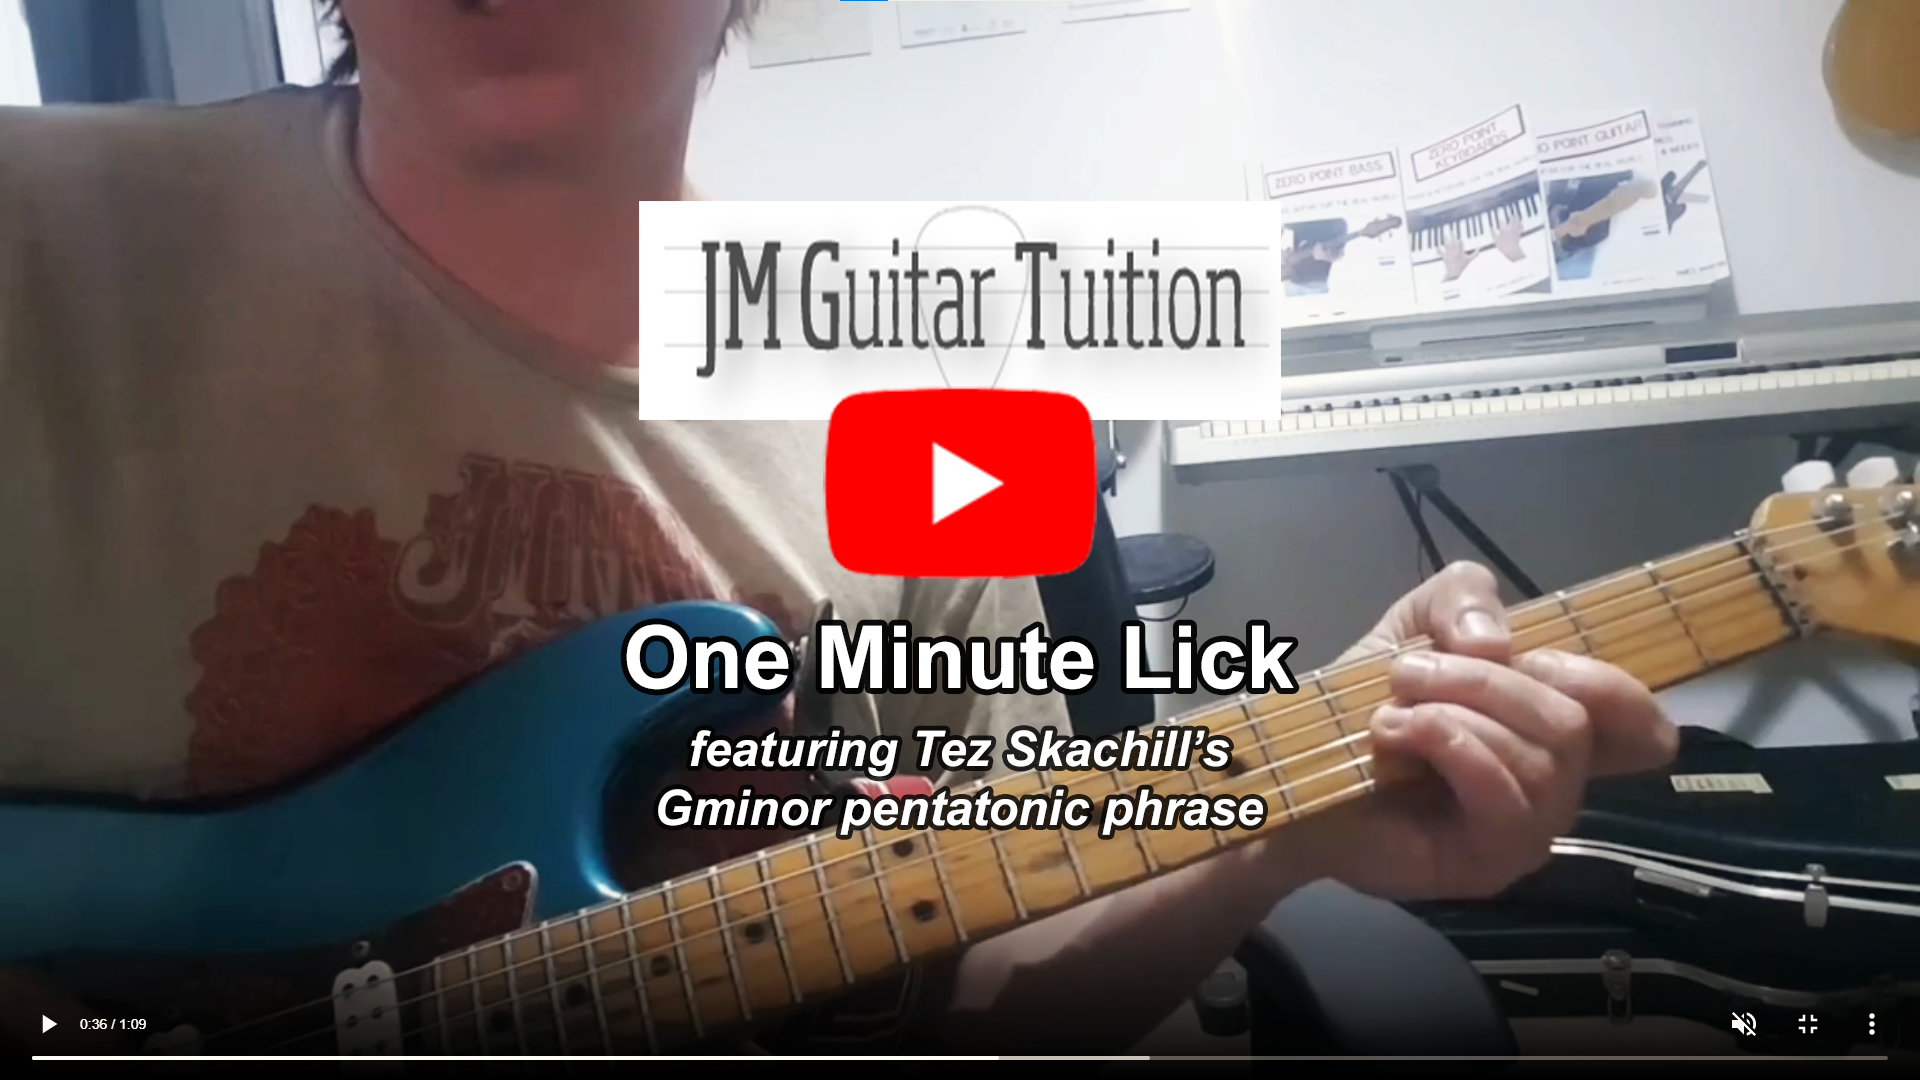 Our Salford Guitar Lessons feature on One Minute Lick from JMGuitarTuition